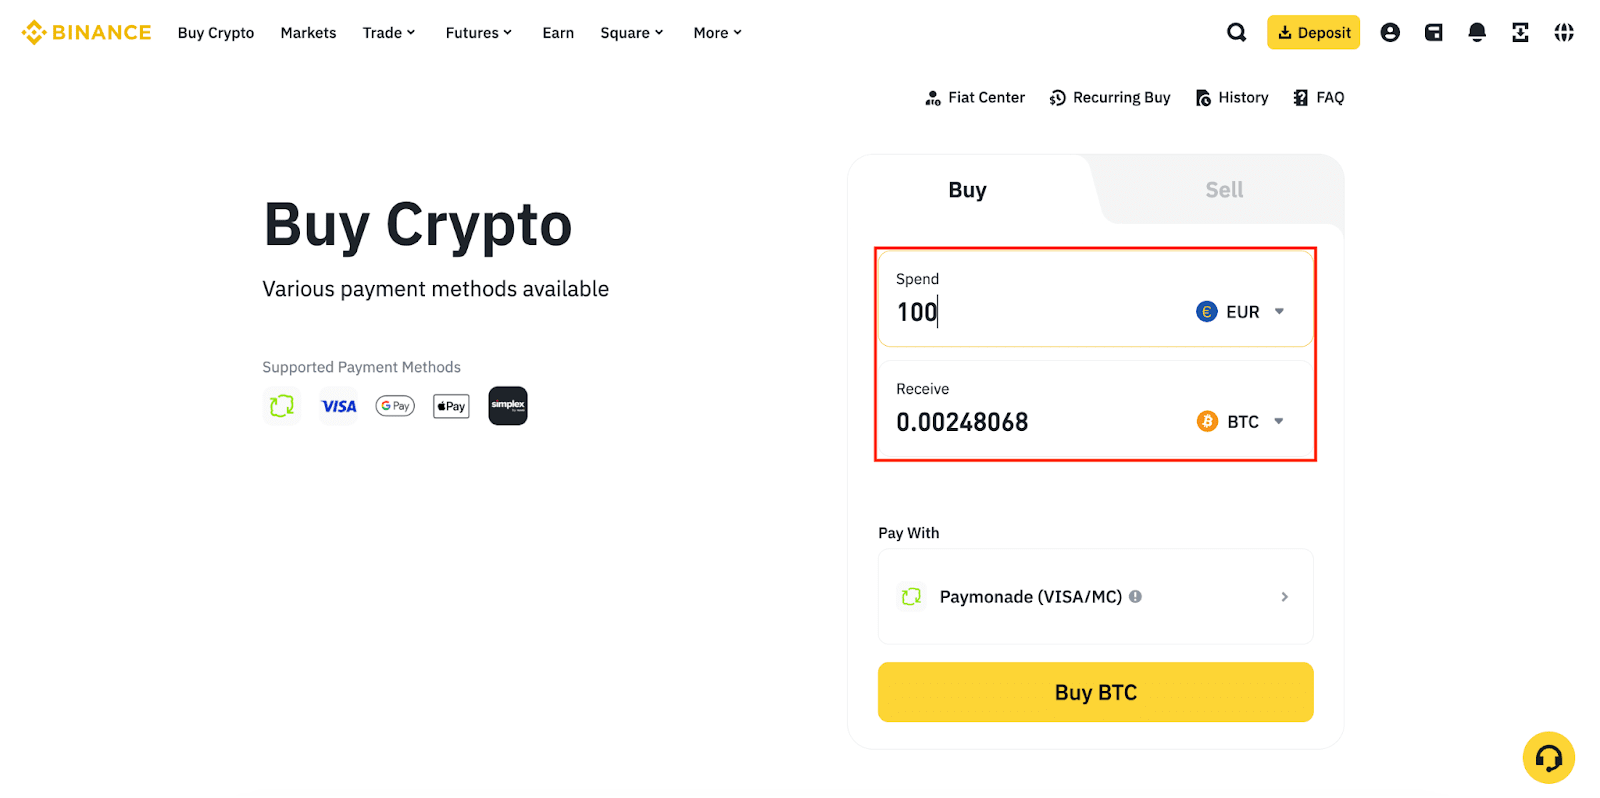 How to Use Binance - The Beginner's Guide | CoinMarketCap